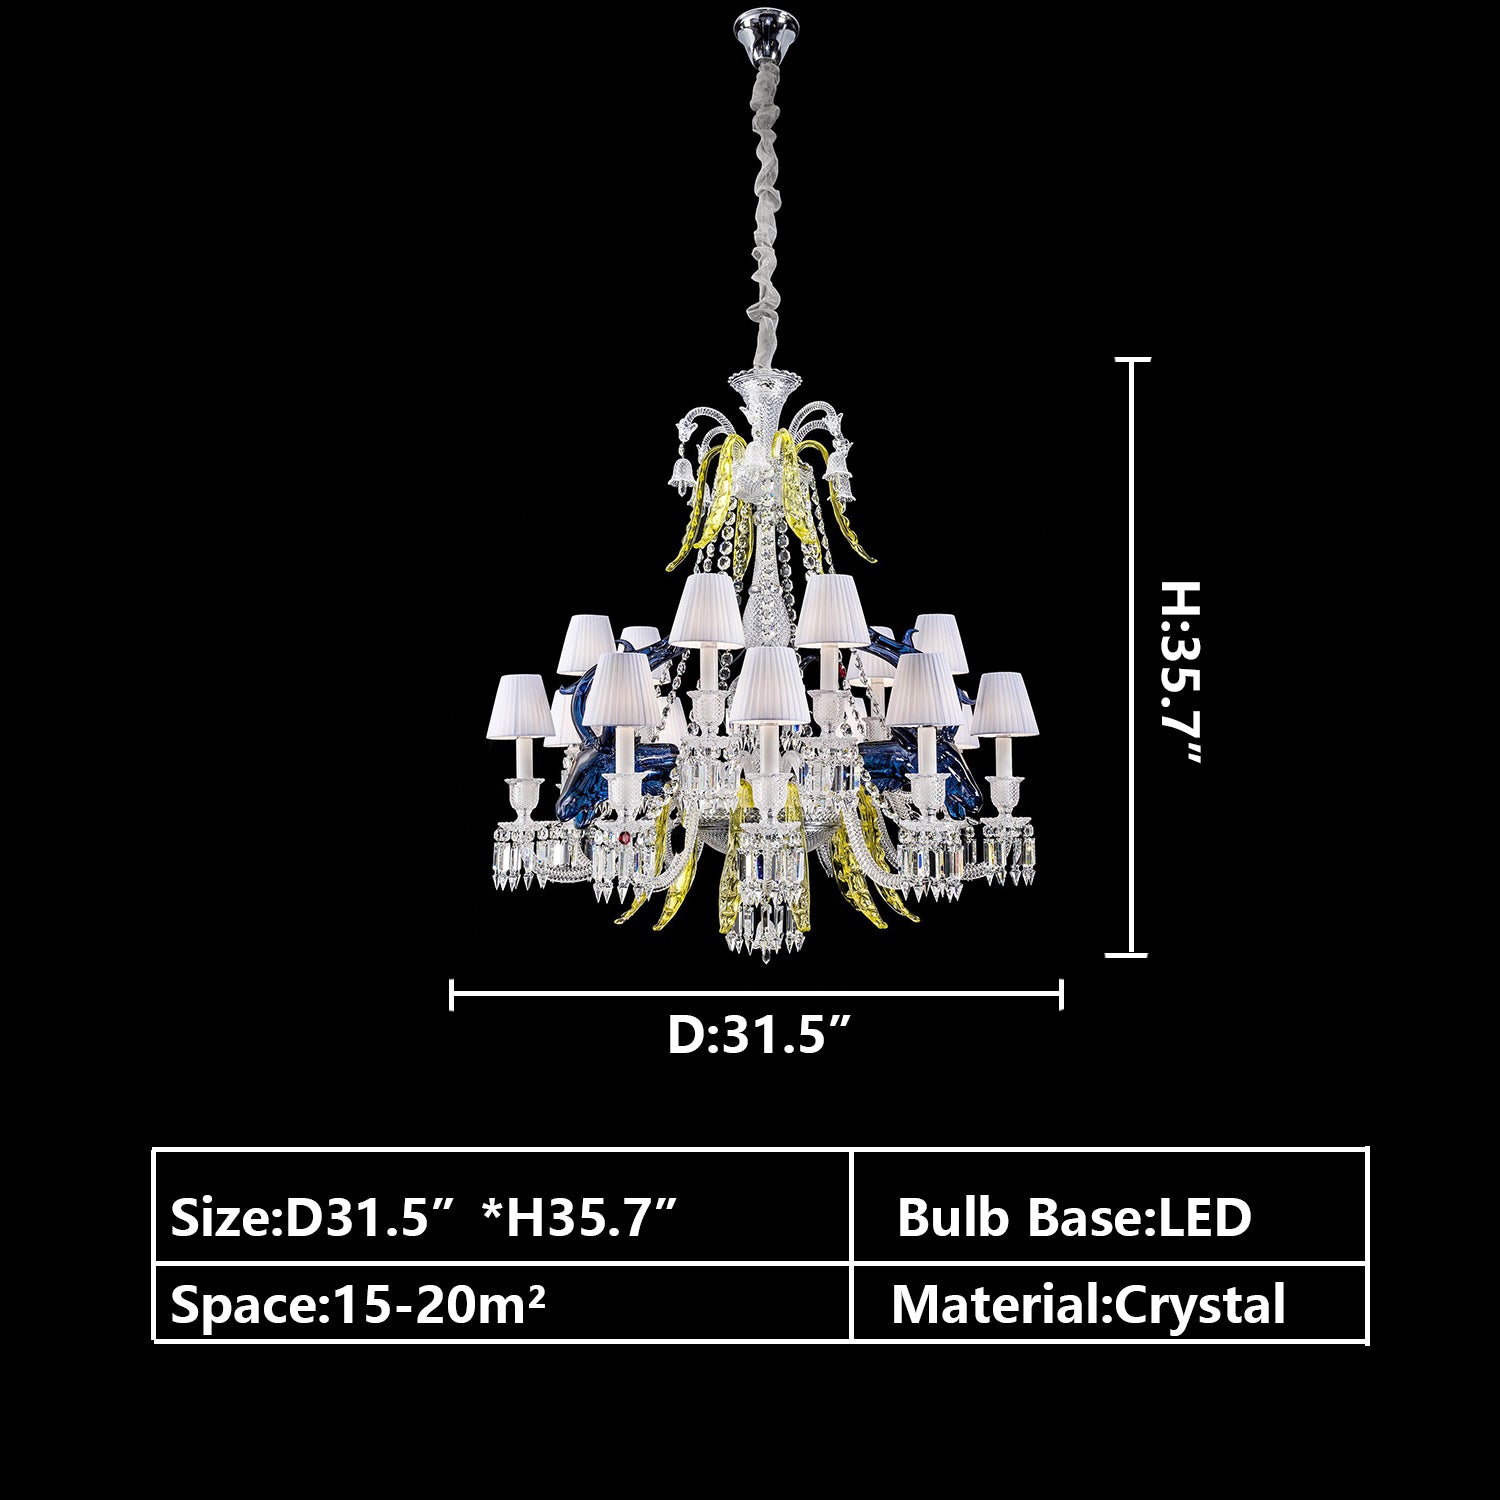 D31.5"*H35.7" chandelier,chandeliers,pendant,crystal,metal,glass,colorful,stained,yellow,blue,candle,glass shade,red,oversized,large,huge,big,luxury,living room,dining room,foyer,entrys,hallway,loft,stairs